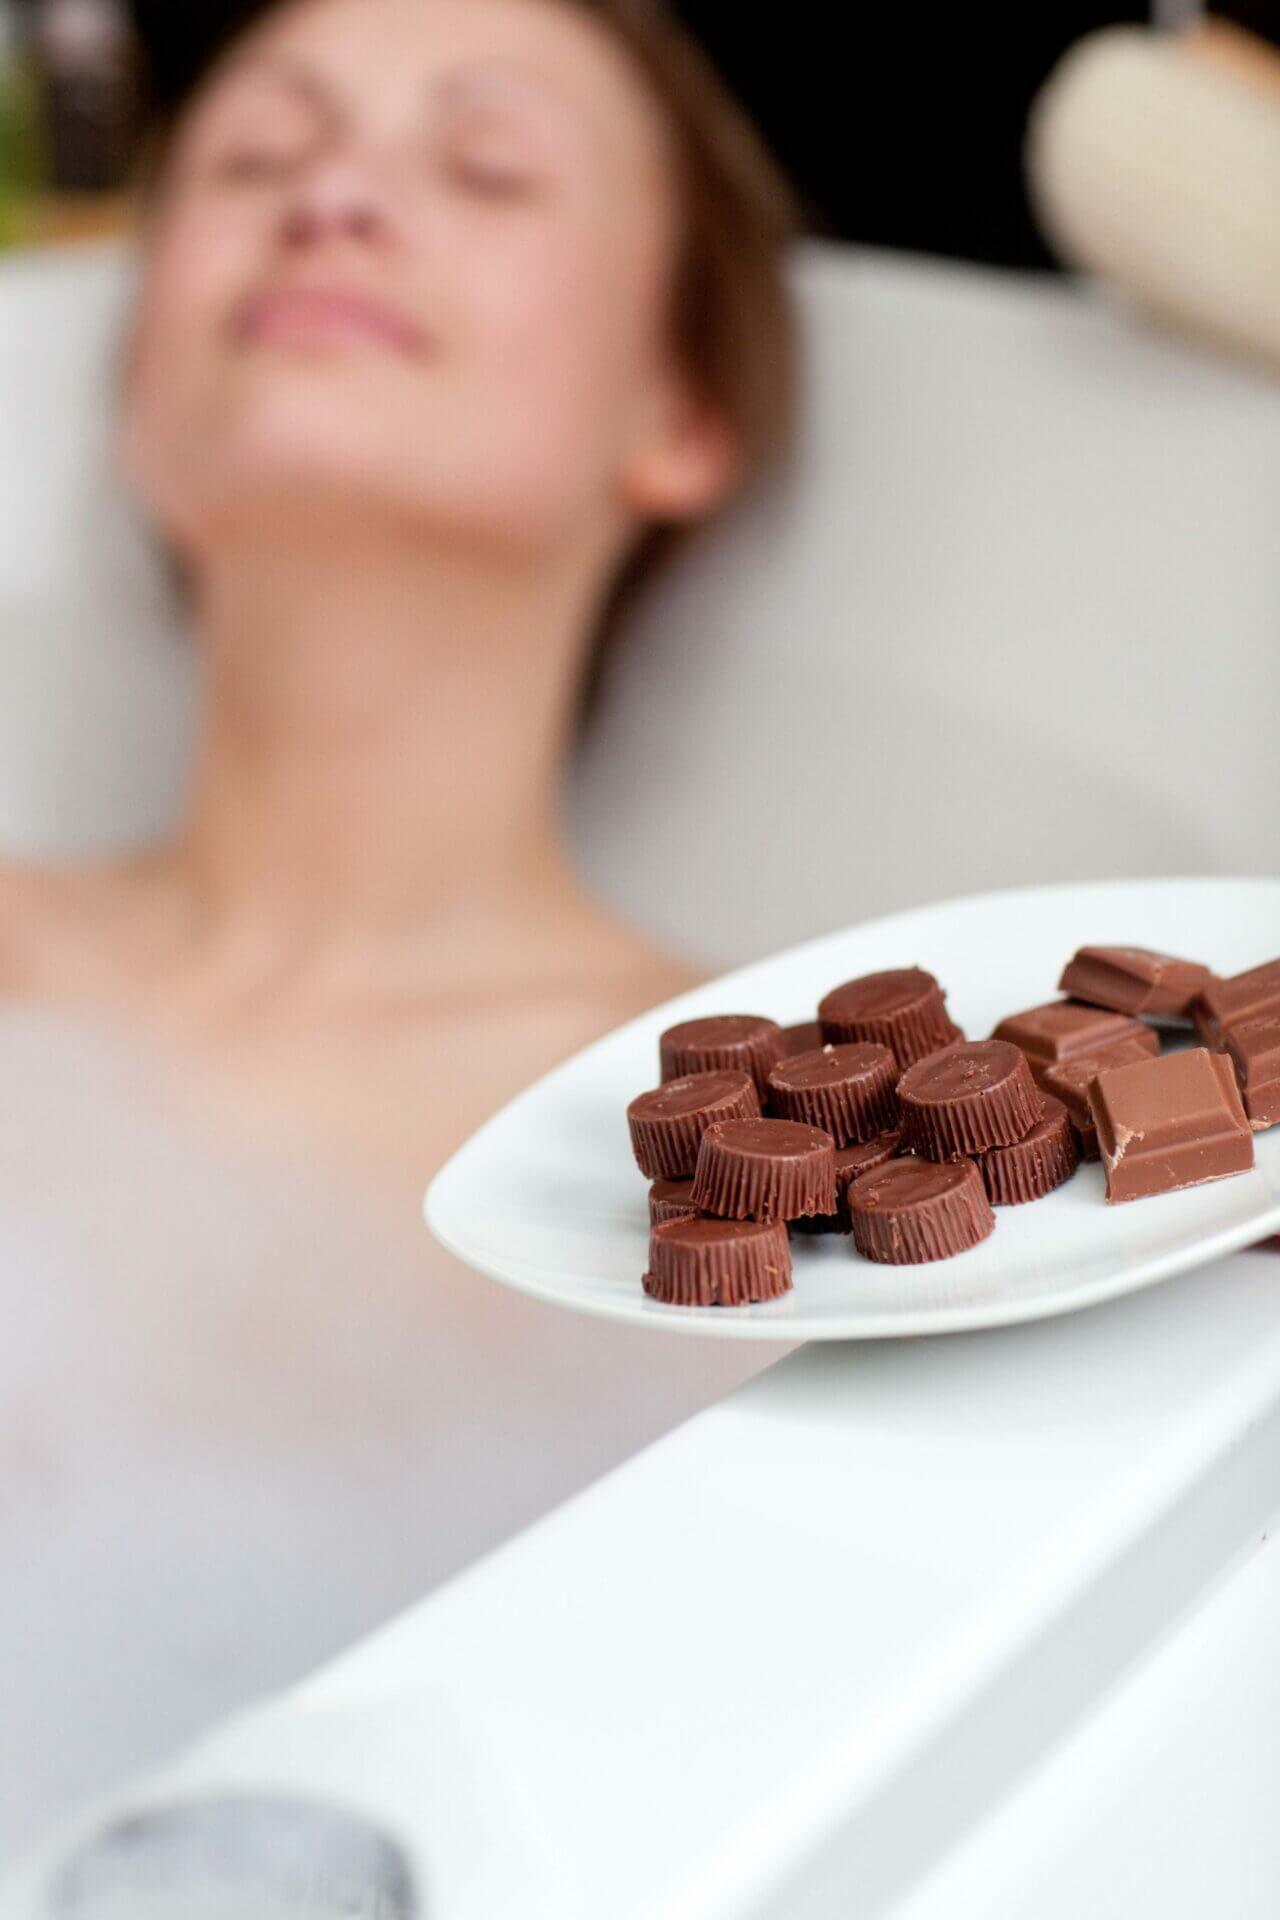 Top 11 Bubble Bath and Chocolate Pairing Guide - TOA Waters